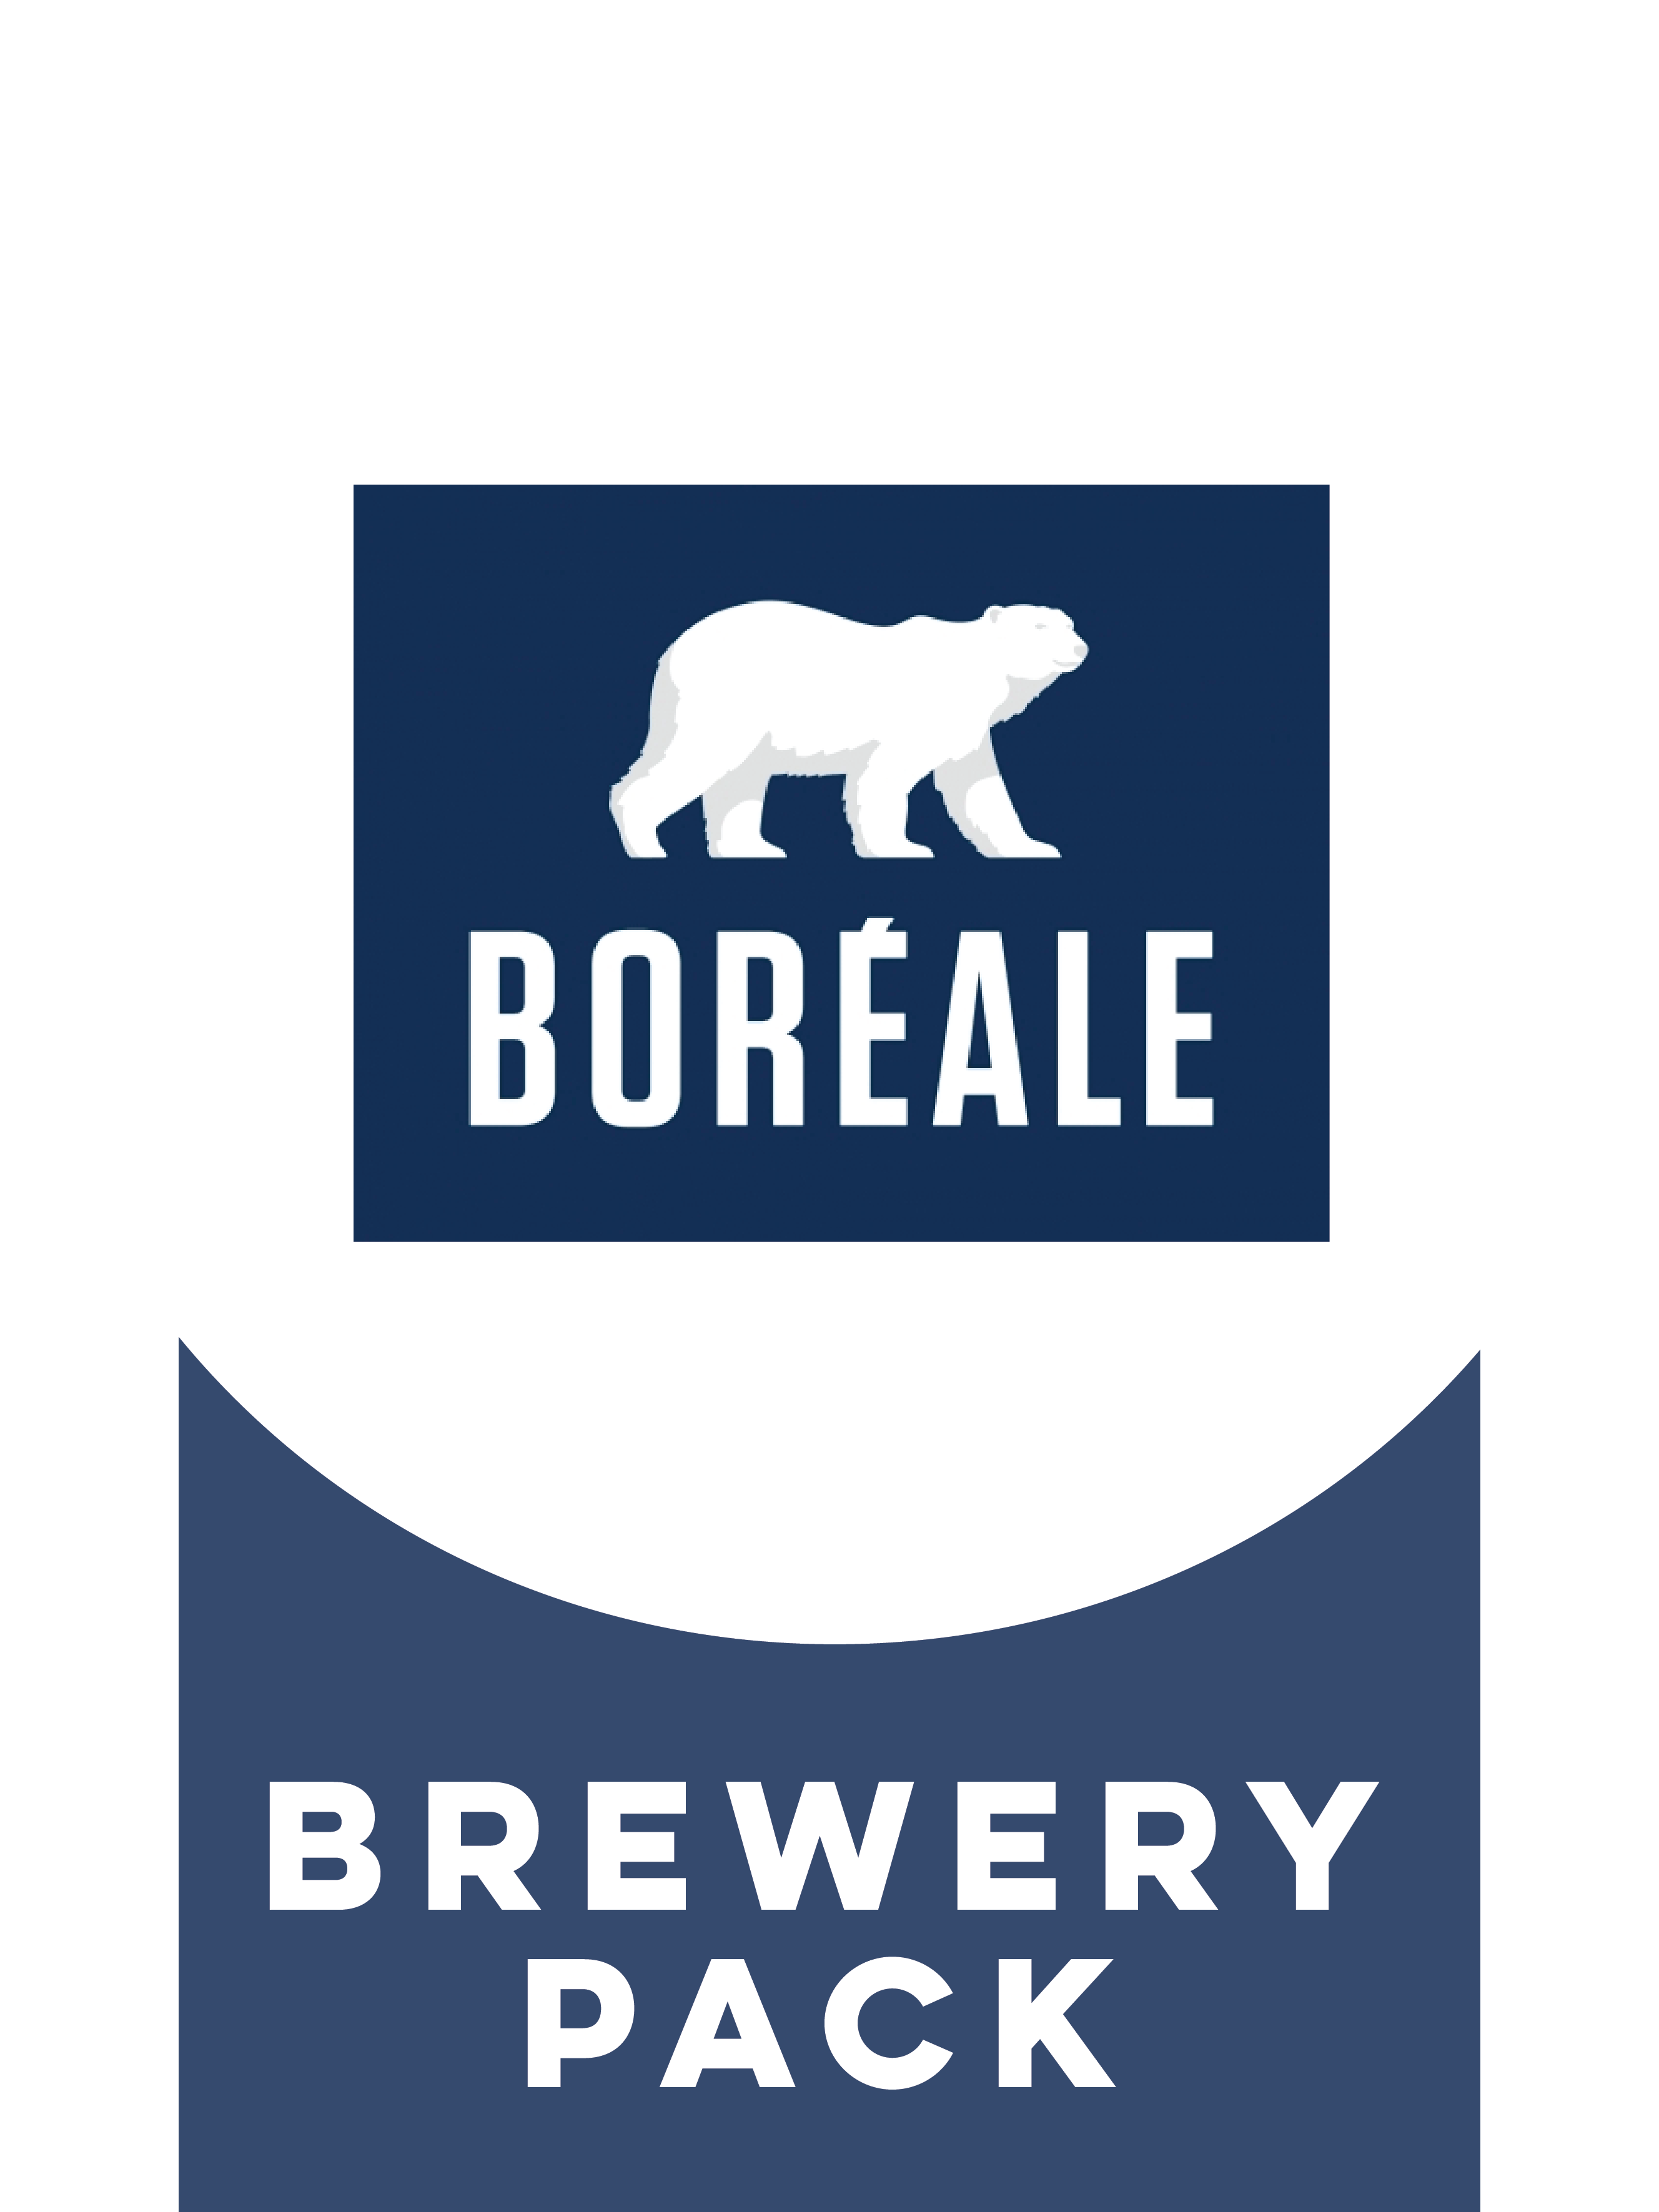 -Boréale- Boréale Brewery Pack-Packs & Cases- Only @ Beer Republic - The best online beer store for American & Canadian craft beer - Buy beer online from the USA and Canada - Bier online kopen - Amerikaans bier kopen - Craft beer store - Craft beer kopen - Amerikanisch bier kaufen - Bier online kaufen - Acheter biere online - IPA - Stout - Porter - New England IPA - Hazy IPA - Imperial Stout - Barrel Aged - Barrel Aged Imperial Stout - Brown - Dark beer - Blond - Blonde - Pilsner - Lager - Wheat - Weizen - 